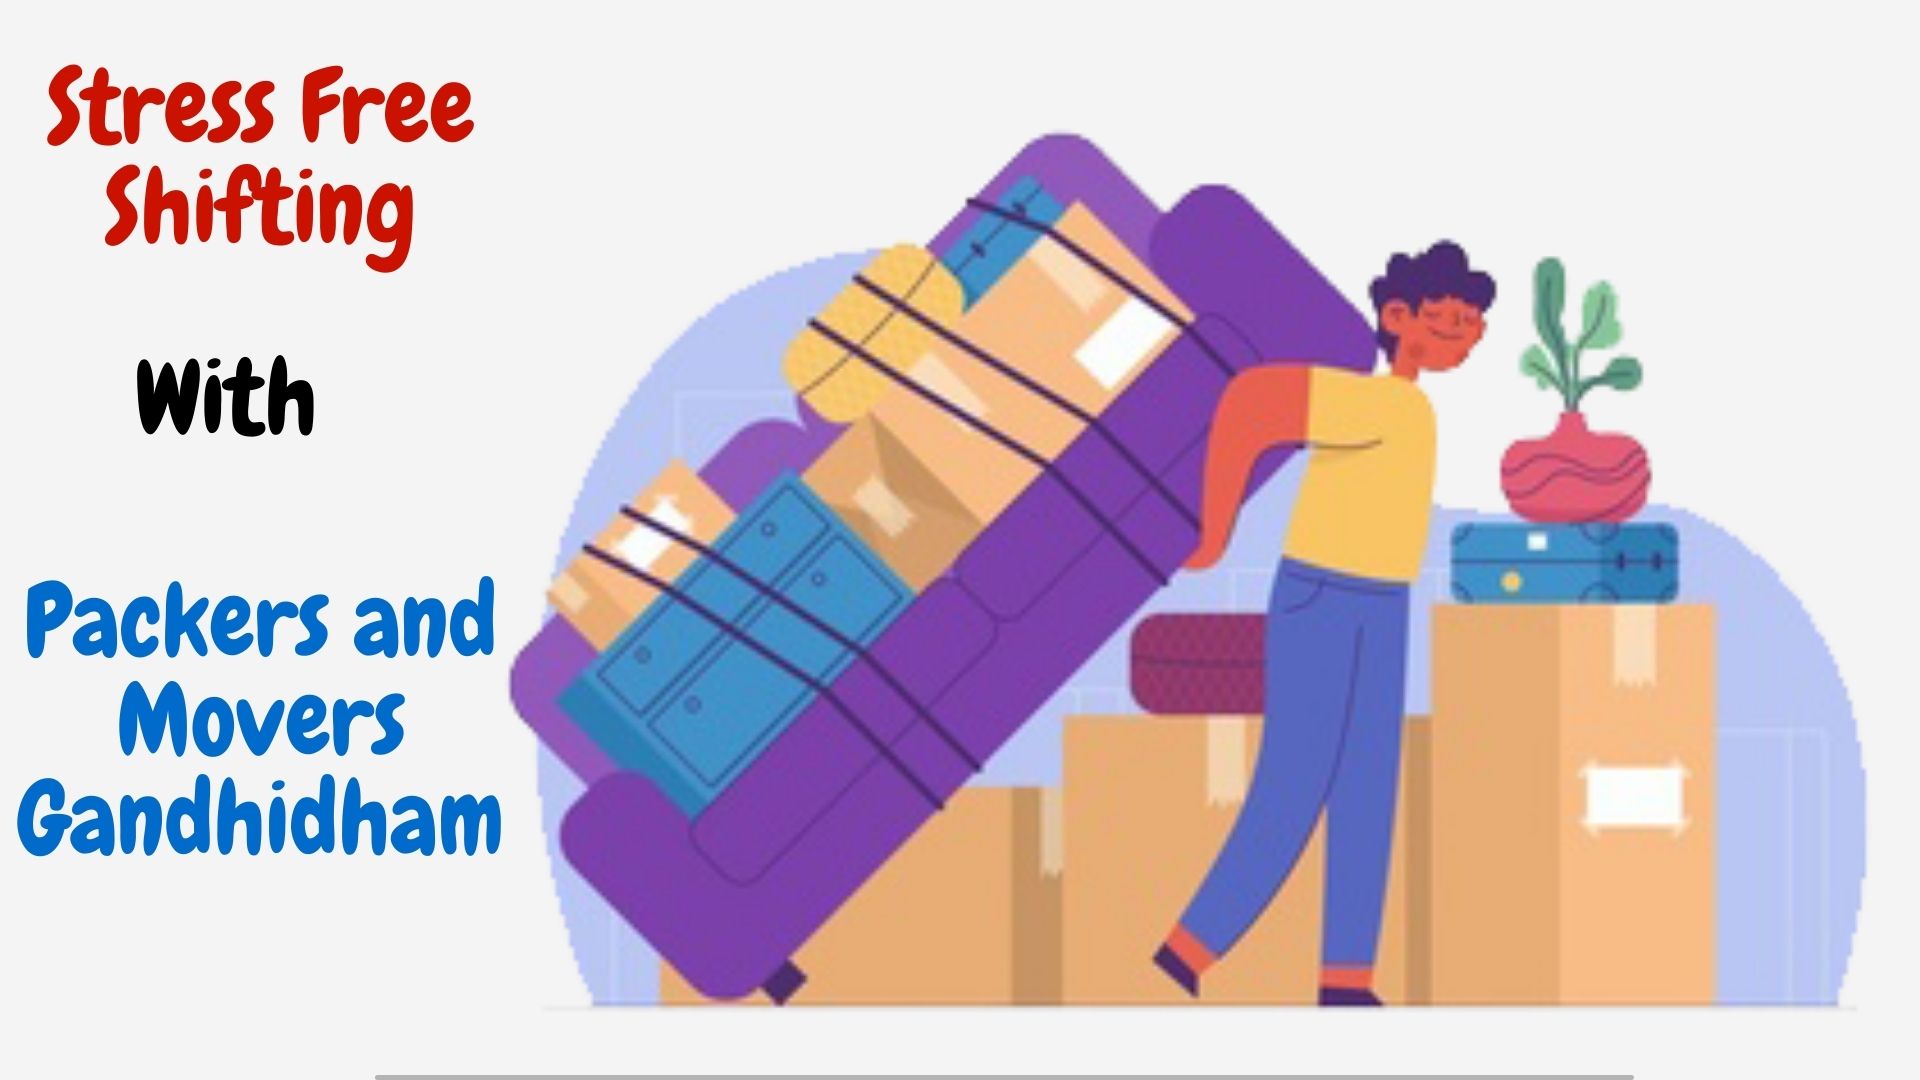 Packers and Movers Gandhidham